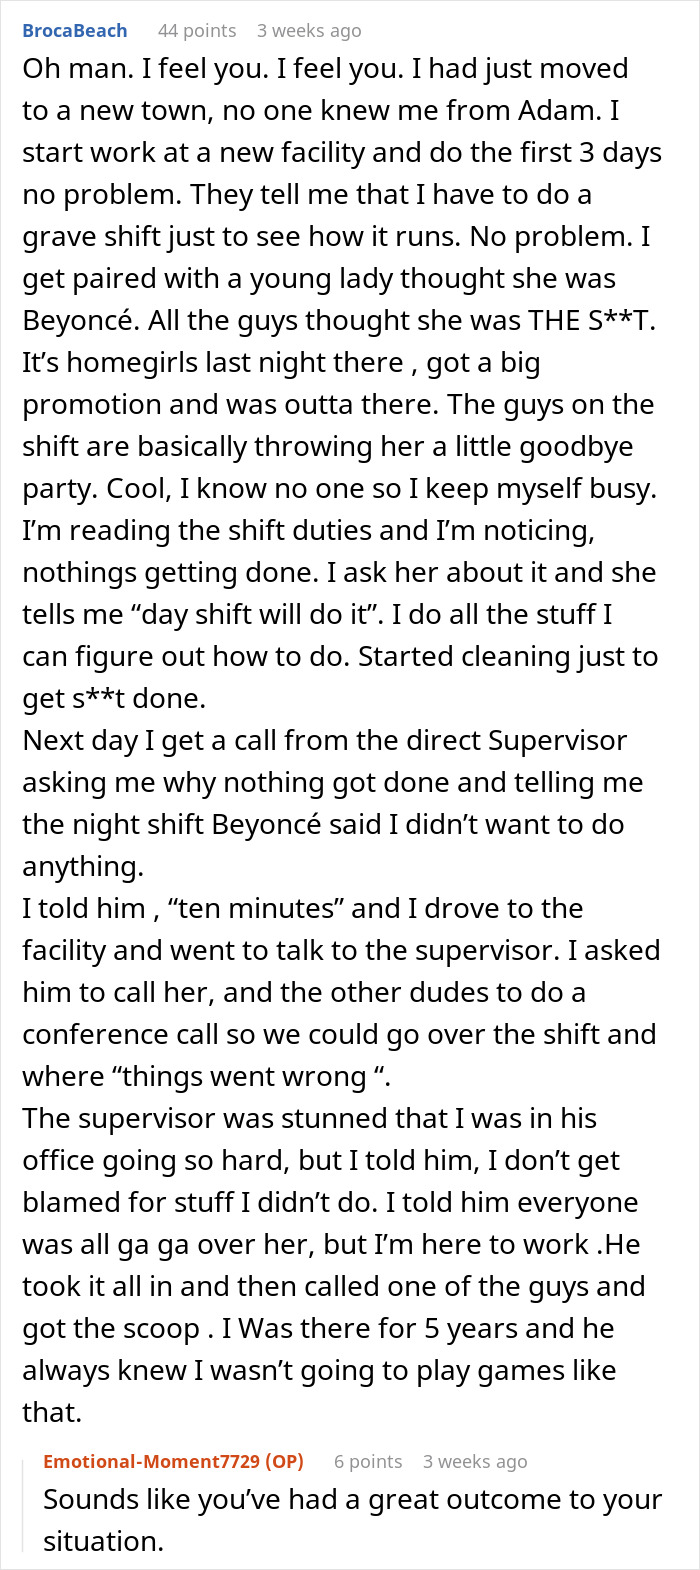 Woman Decides She Doesn’t Like A New Coworker, Files A Complaint And Gets Him Fired